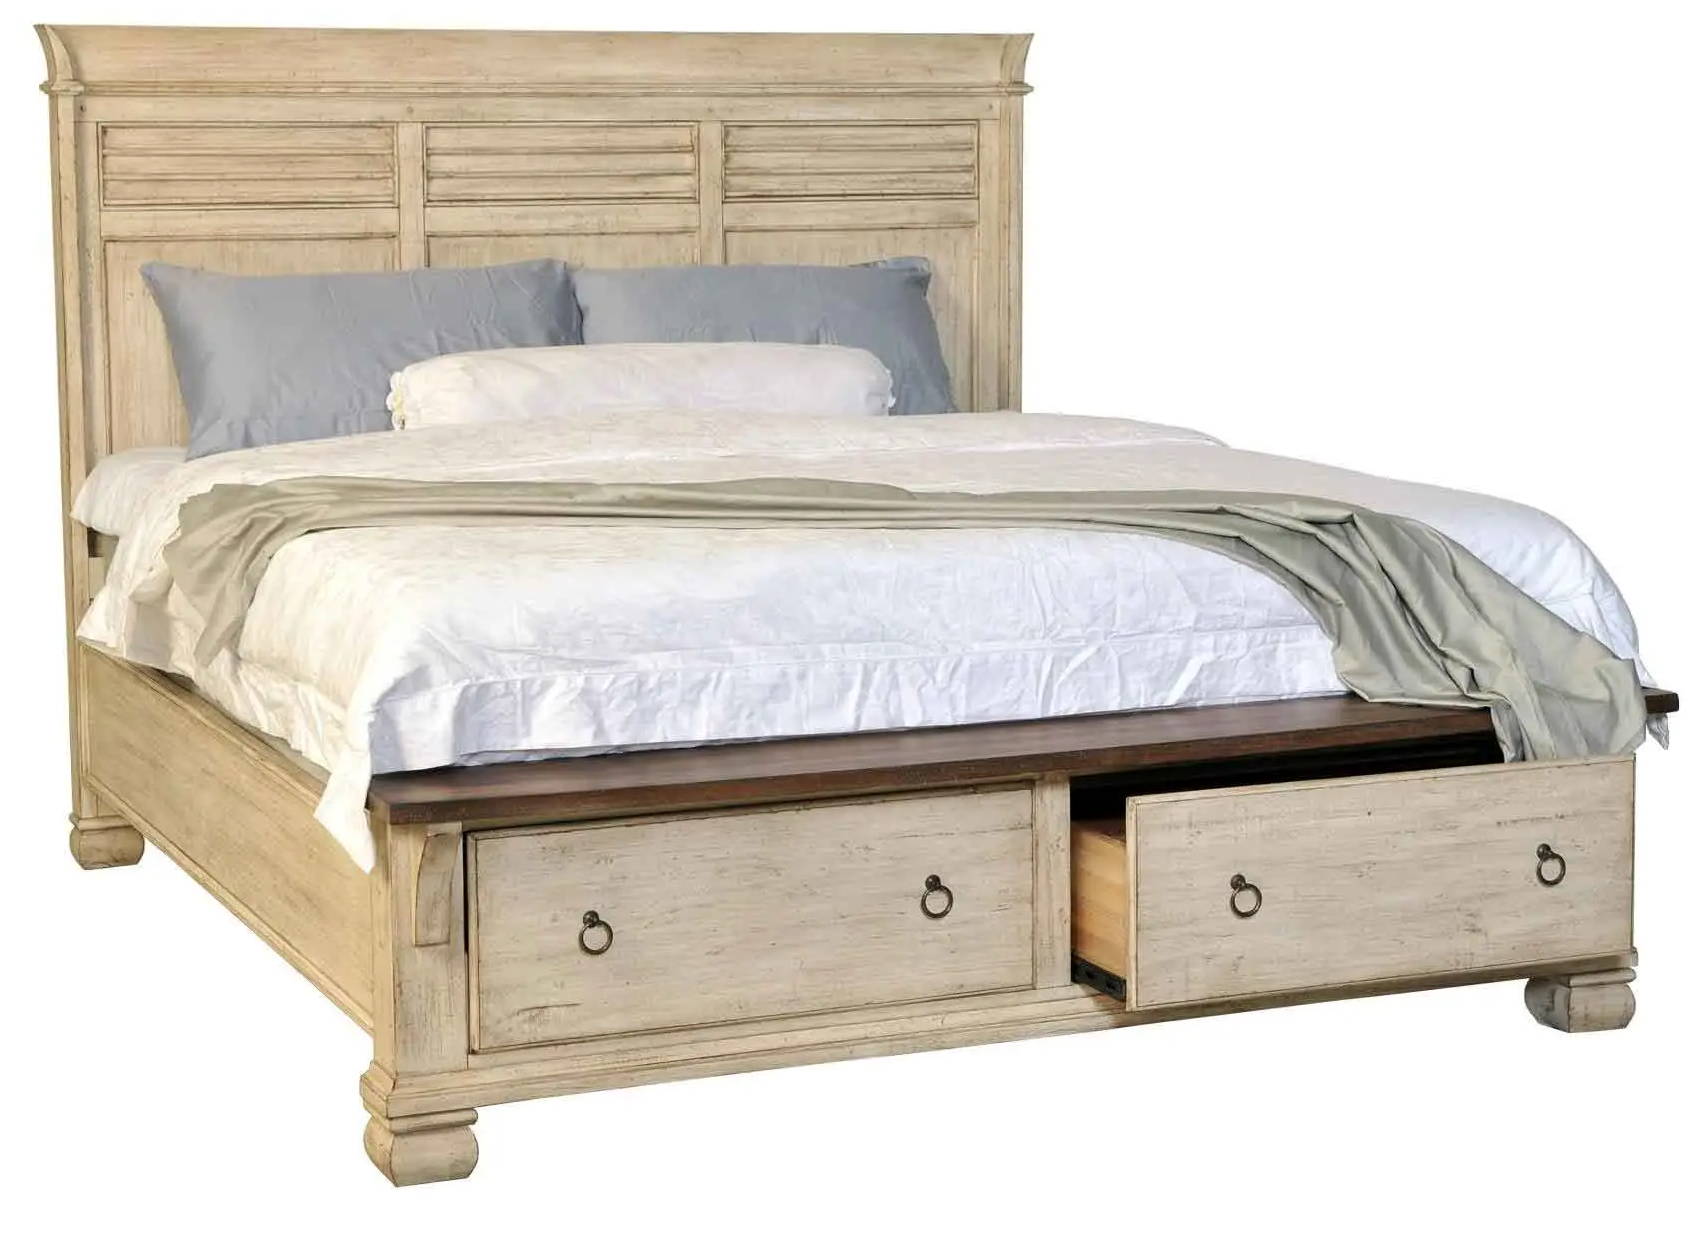 The Belmont By Napa Furniture Designs Product Review